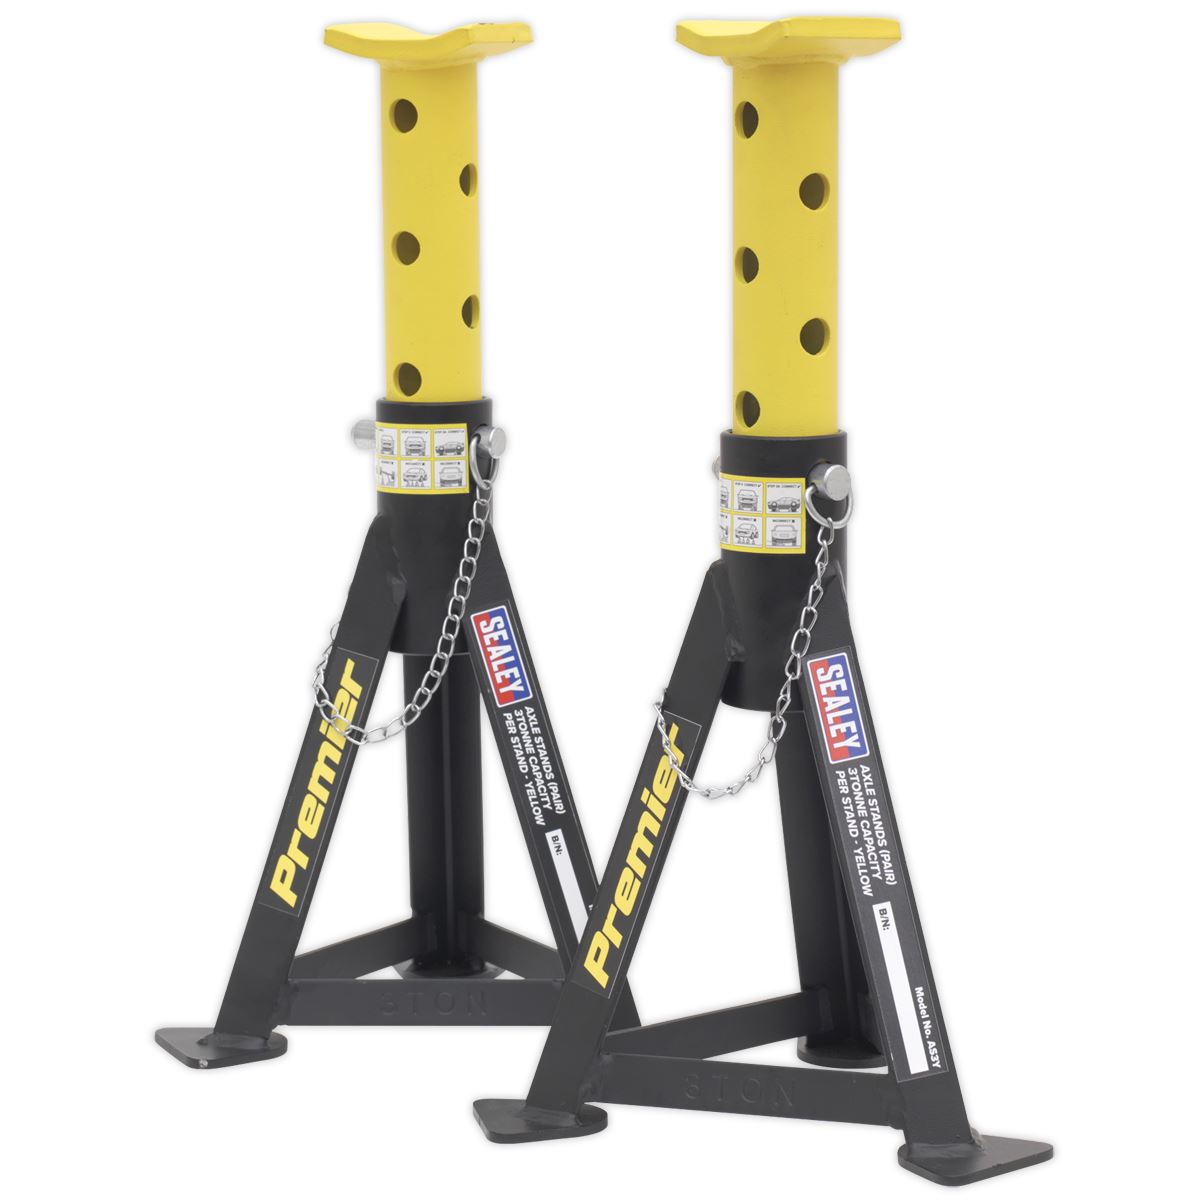 Sealey Premier Premier Axle Stands (Pair) 3 Tonne Capacity per Stand - Yellow